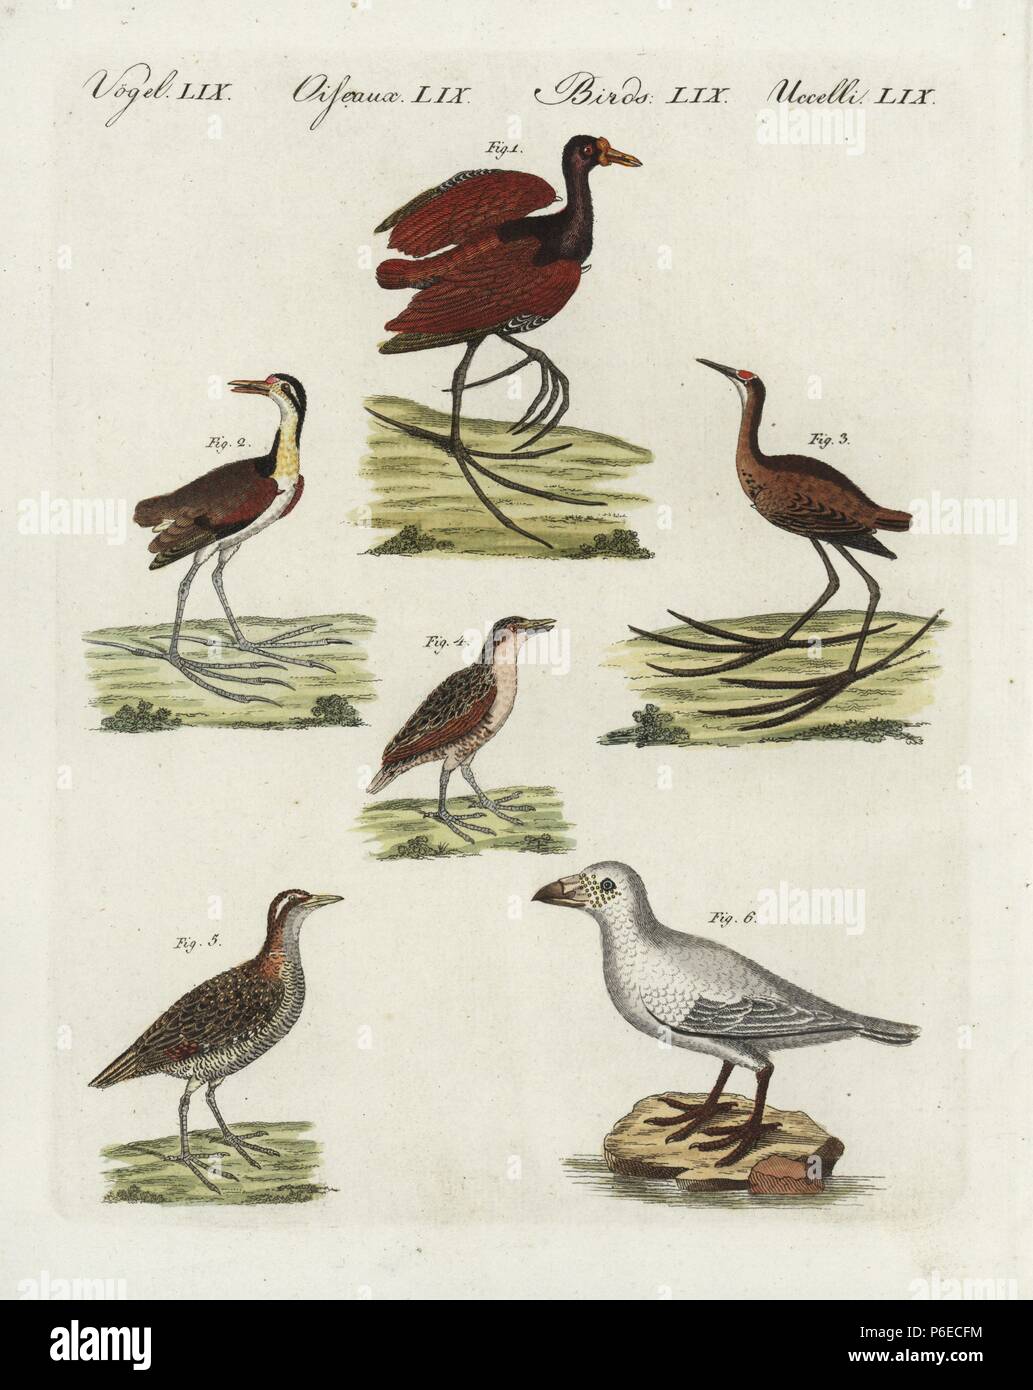 Wattled jacana, Jacana jacana 1, northern jacana, Jacana spinosa 2, African Jacana, Actophilornis africanus 3, land rail, Crex crex 4, buff-banded rail, Gallirallus philippensis 5, and snowy sheathbill, Chionis albus. Handcoloured copperplate engraving from Bertuch's 'Bilderbuch fur Kinder' (Picture Book for Children), Weimar, 1798. Friedrich Johann Bertuch (1747-1822) was a German publisher and man of arts most famous for his 12-volume encyclopedia for children illustrated with 1,200 engraved plates on natural history, science, costume, mythology, etc., published from 1790-1830. Stock Photo